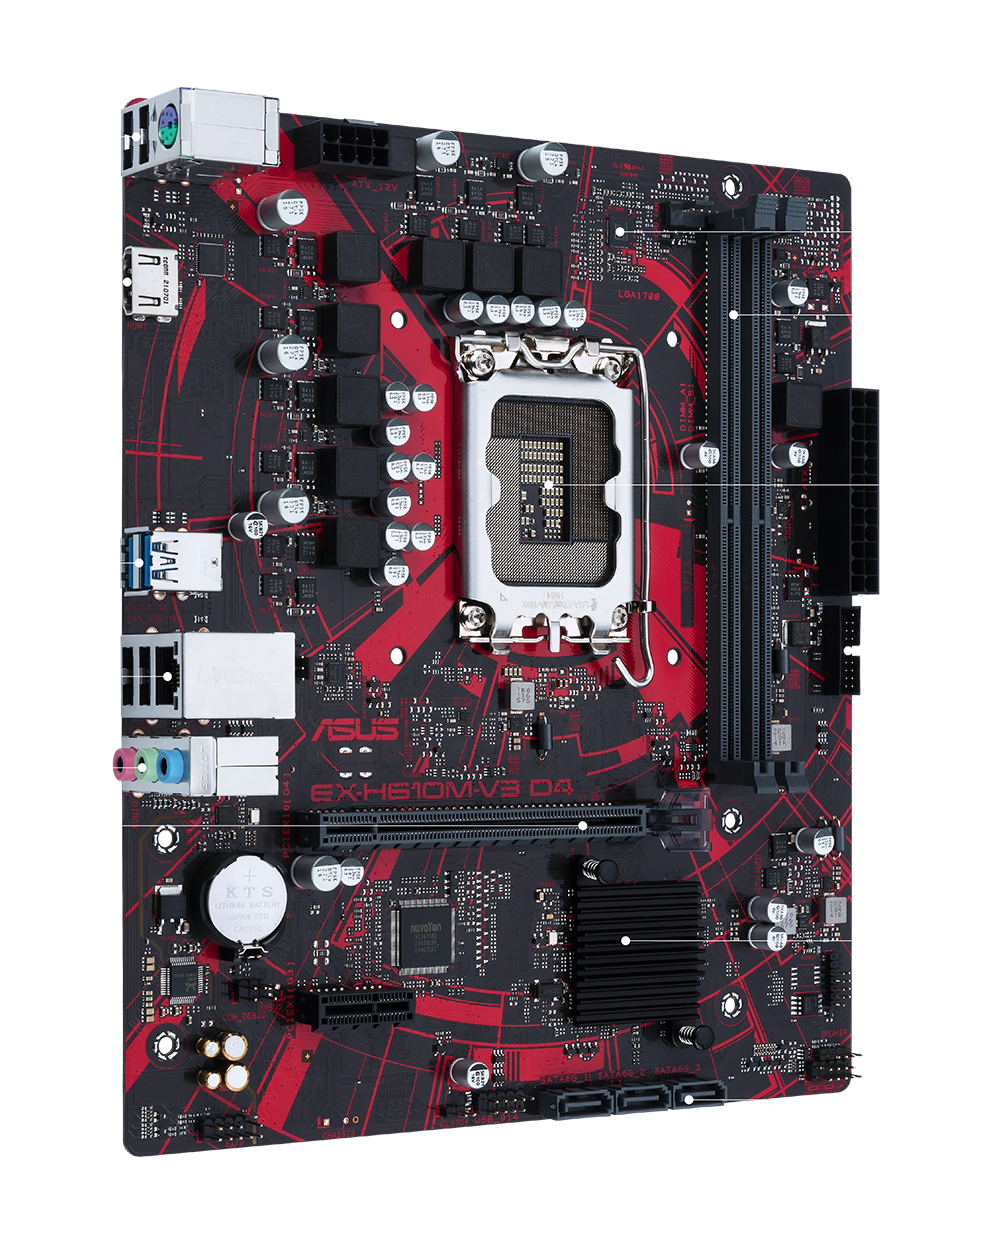 Motherboard layout overview